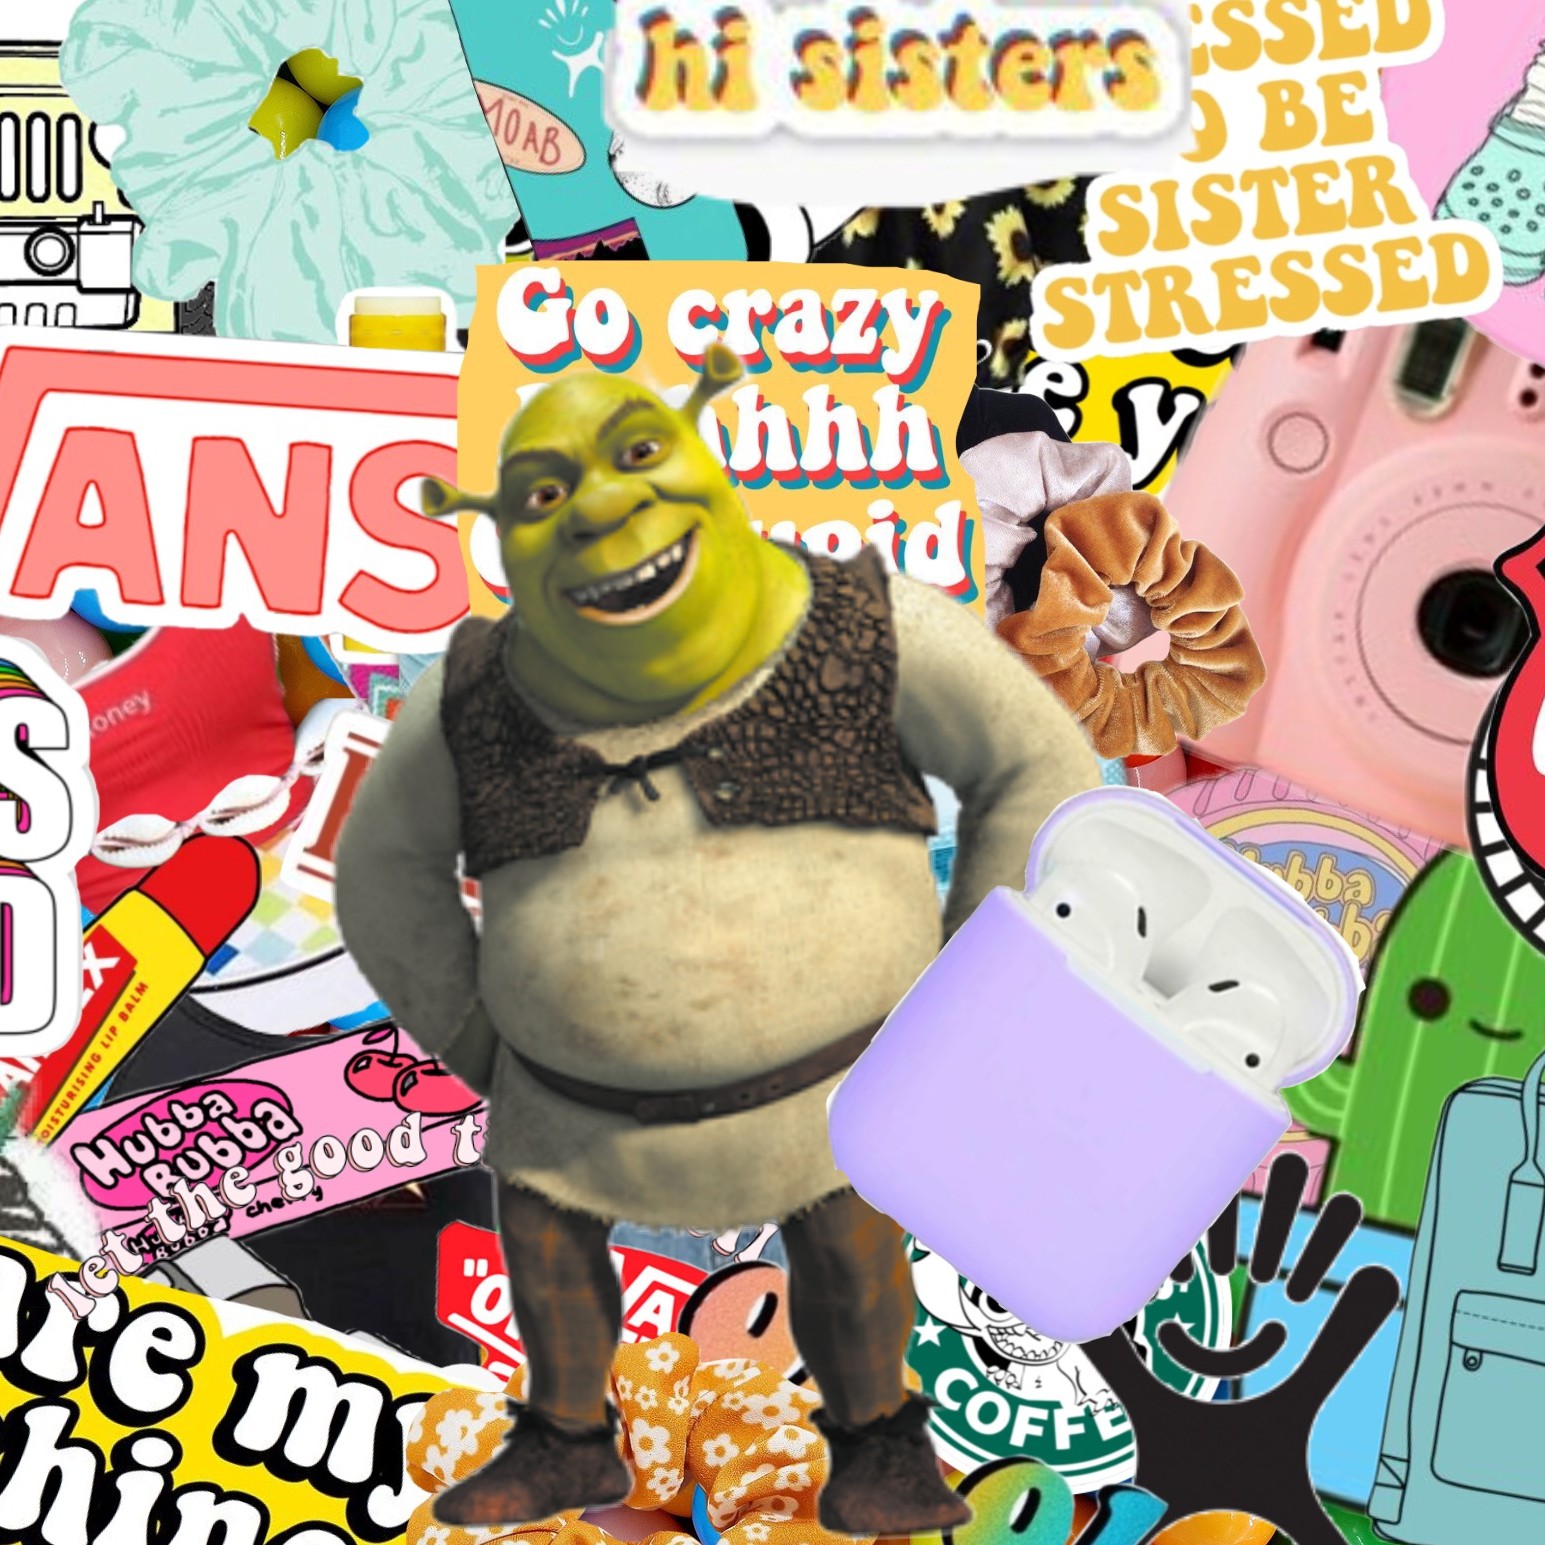 A collage of shrek stickers and other items - Shrek